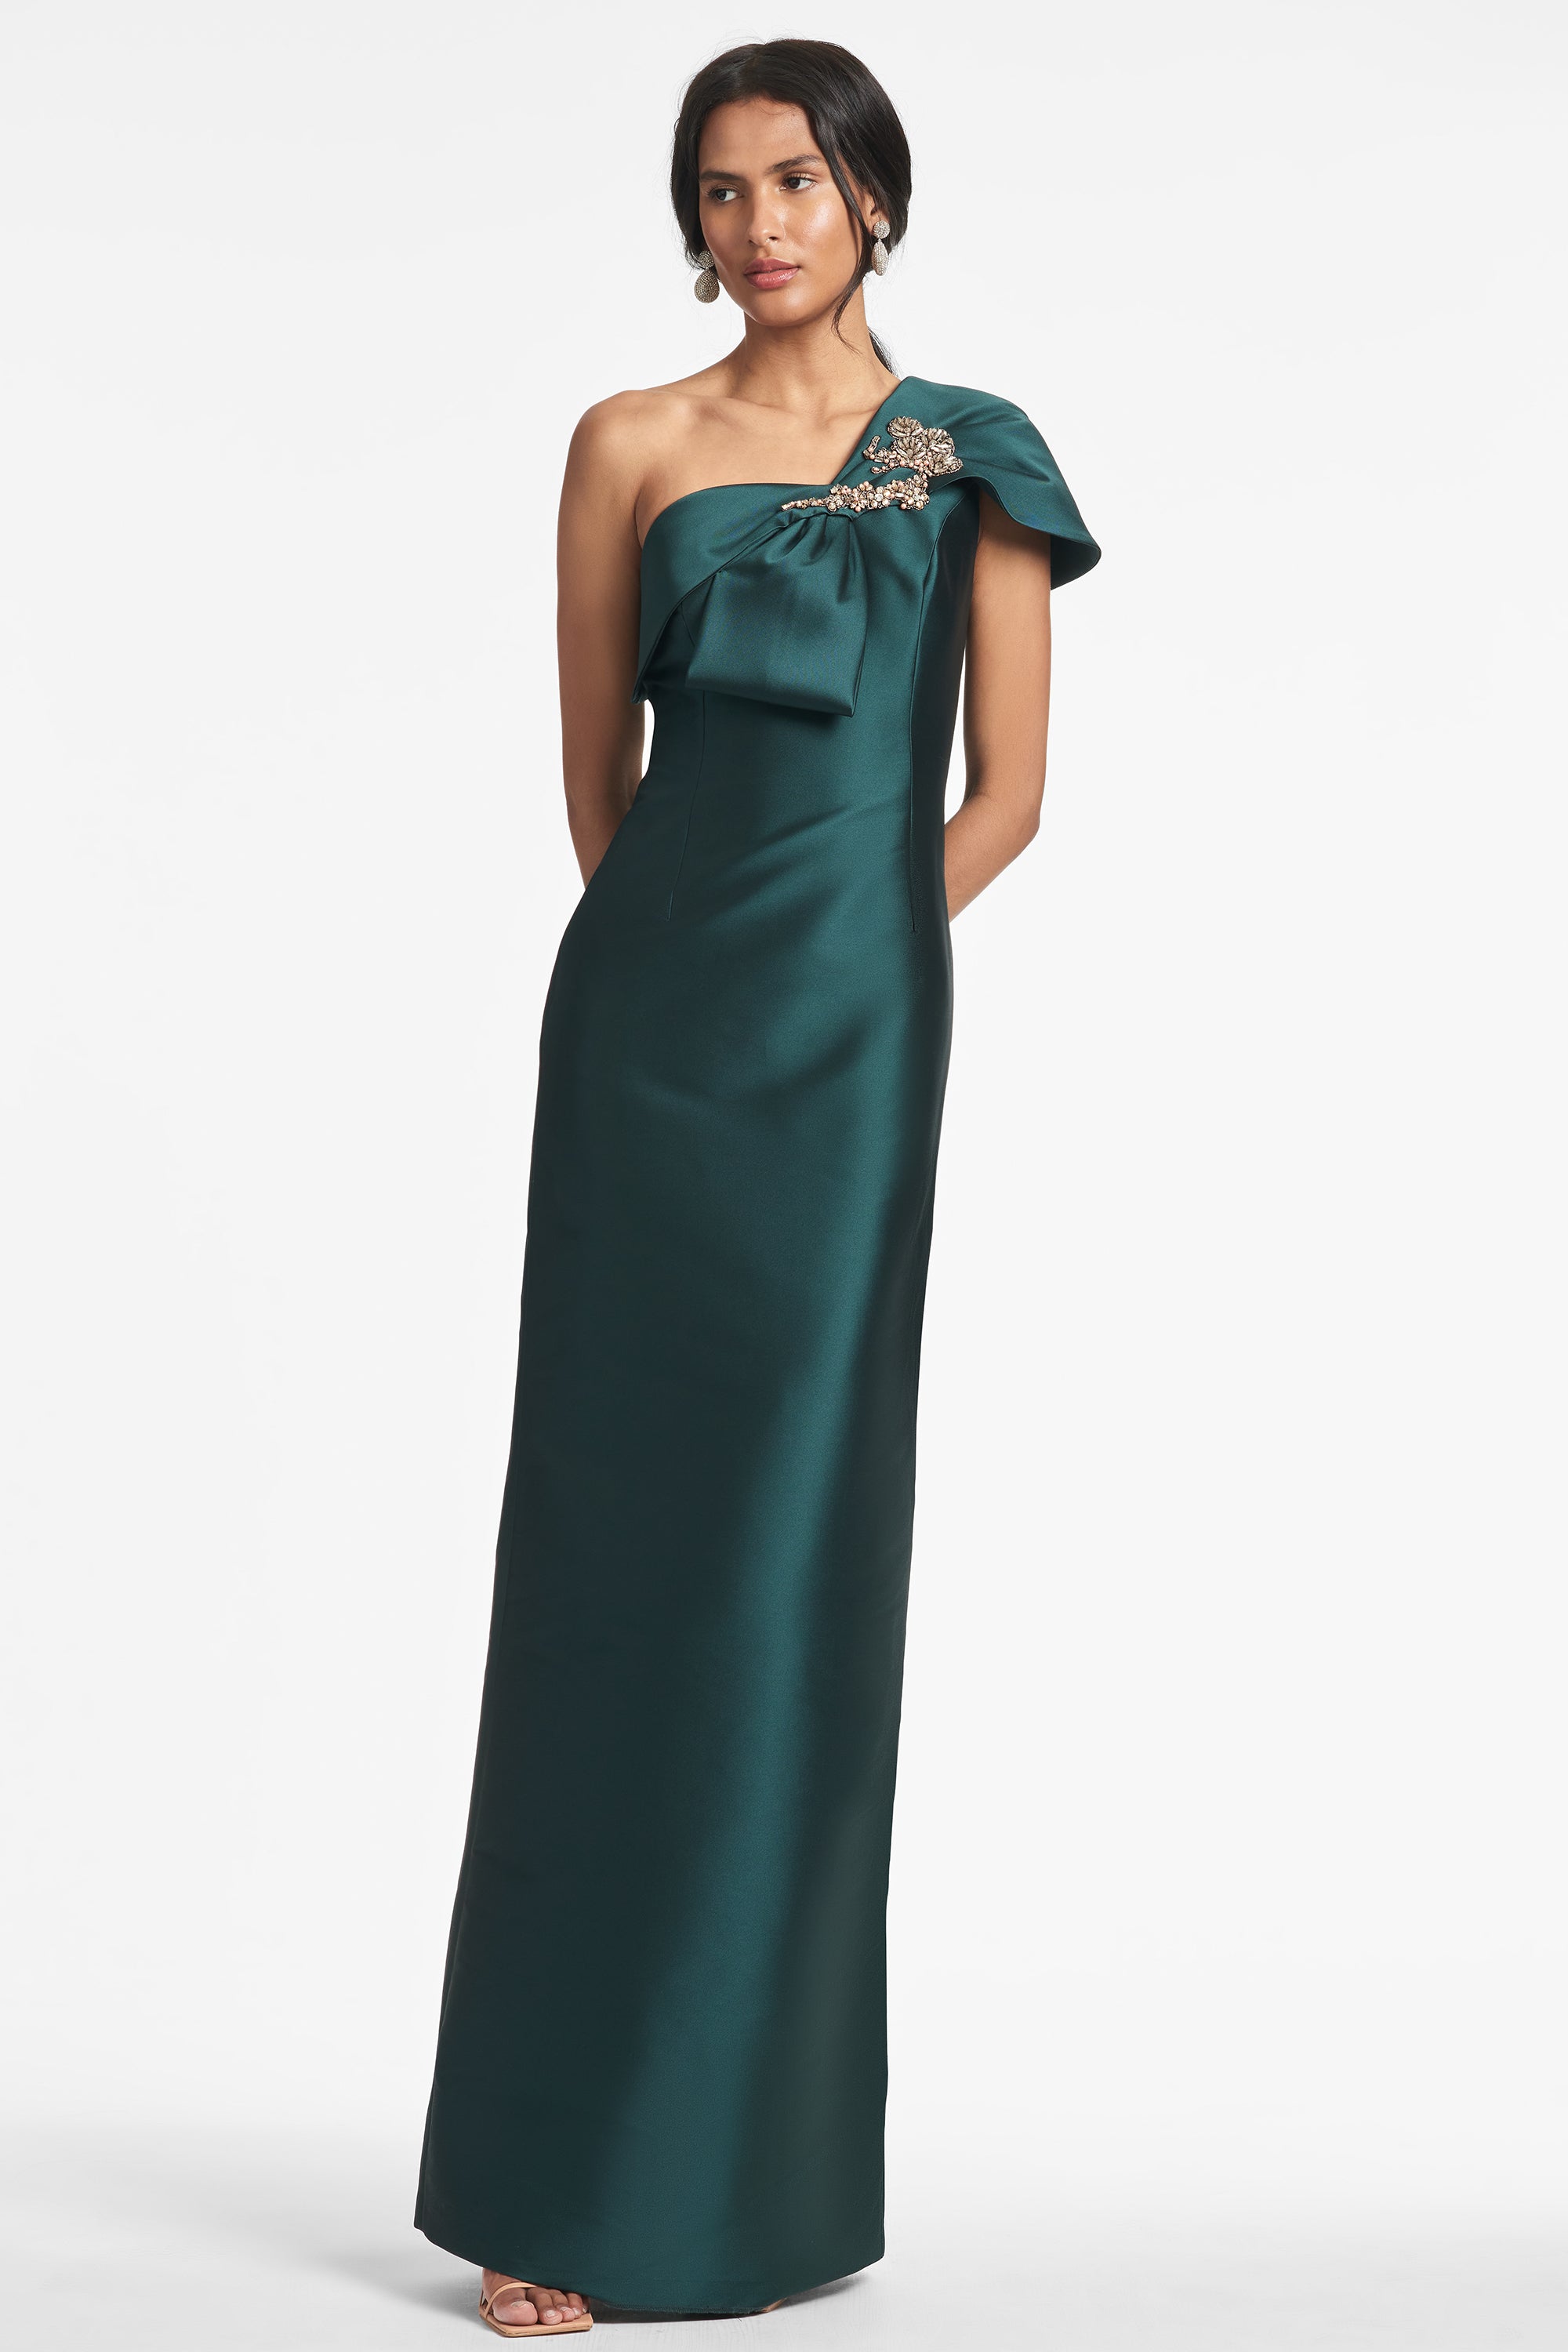 Forest green Gown – Anne Marcia